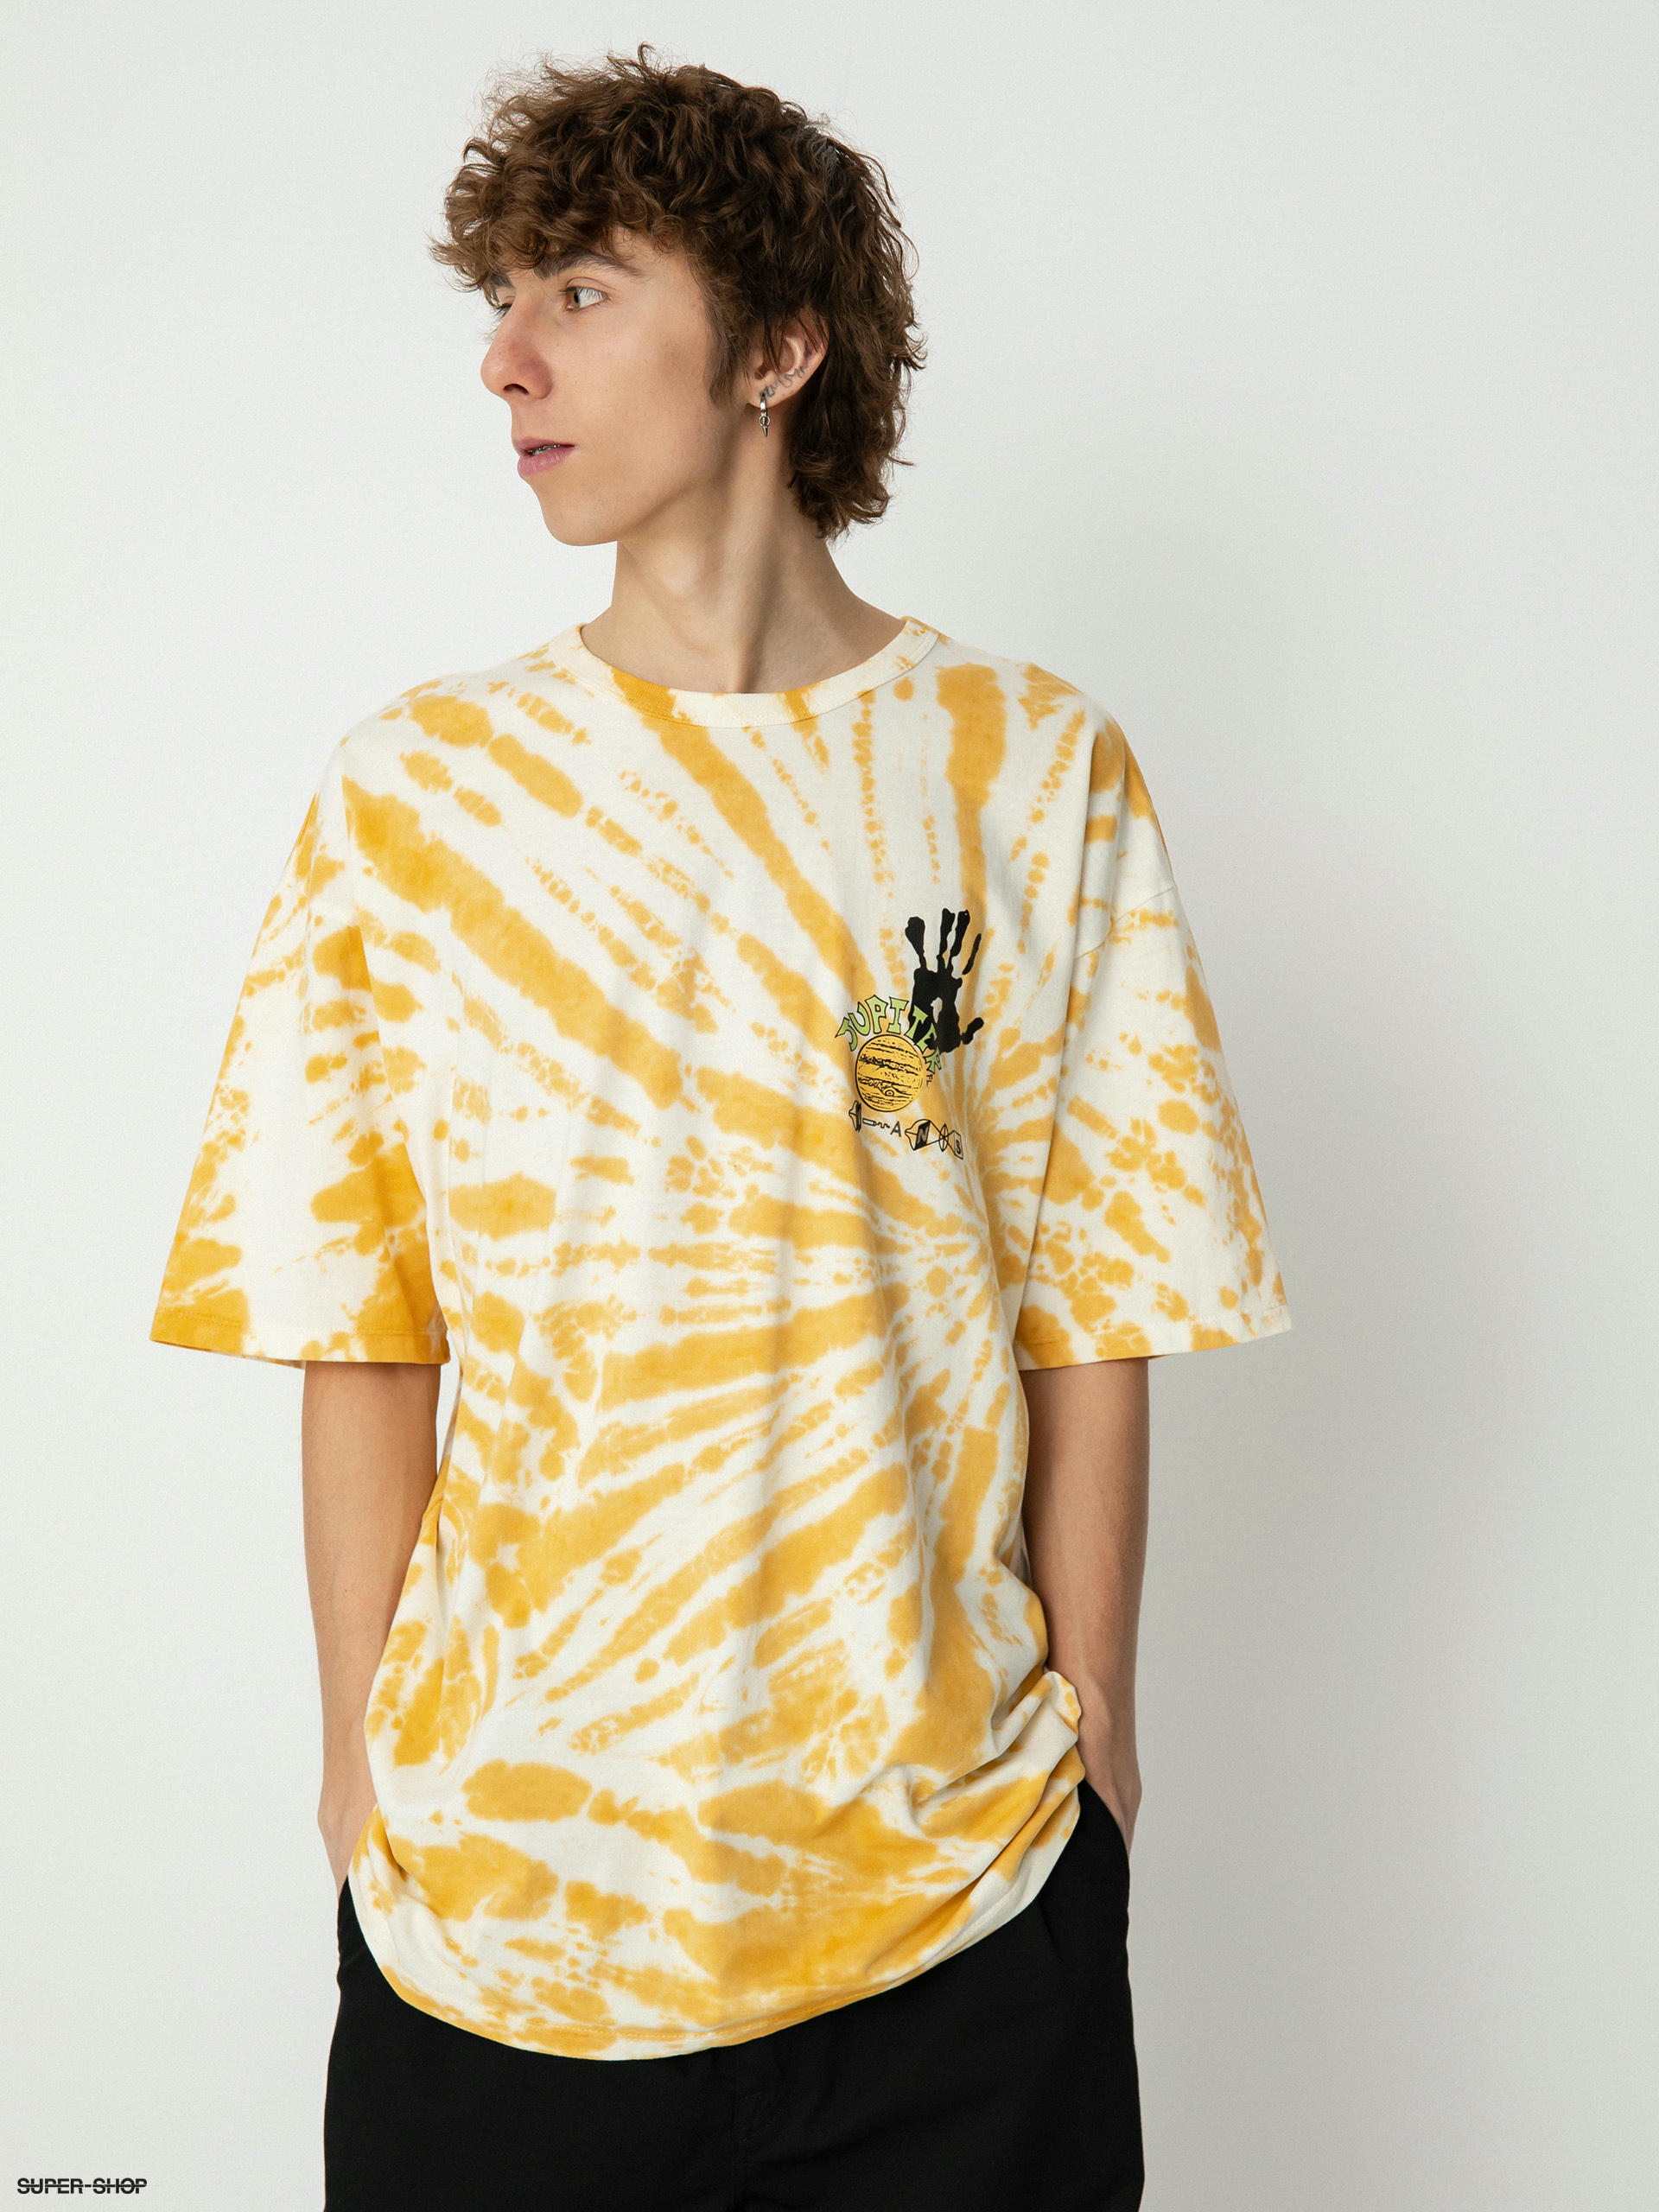 Vans Zion Wright Tie Dye T-shirt (zion wright narcissus)